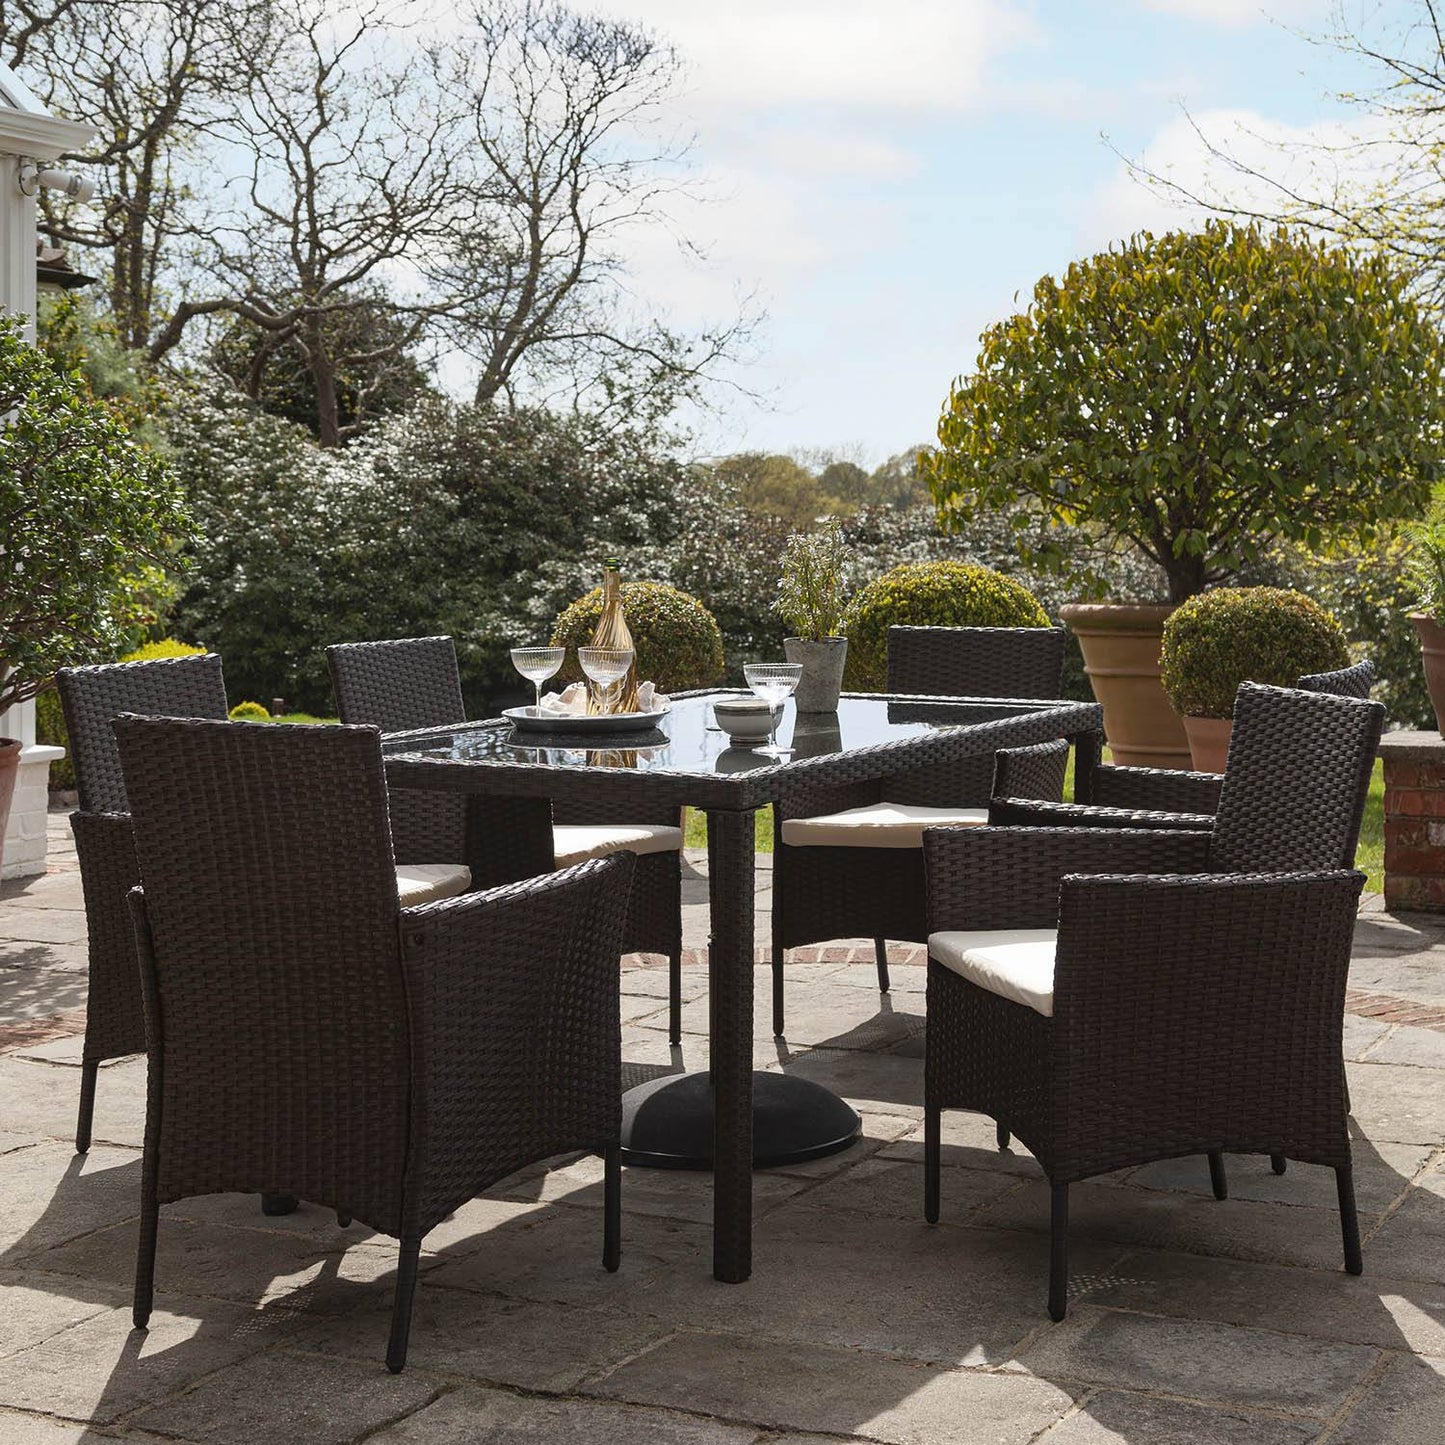  6 Seater Rattan Dining Set with Grey Parasol 